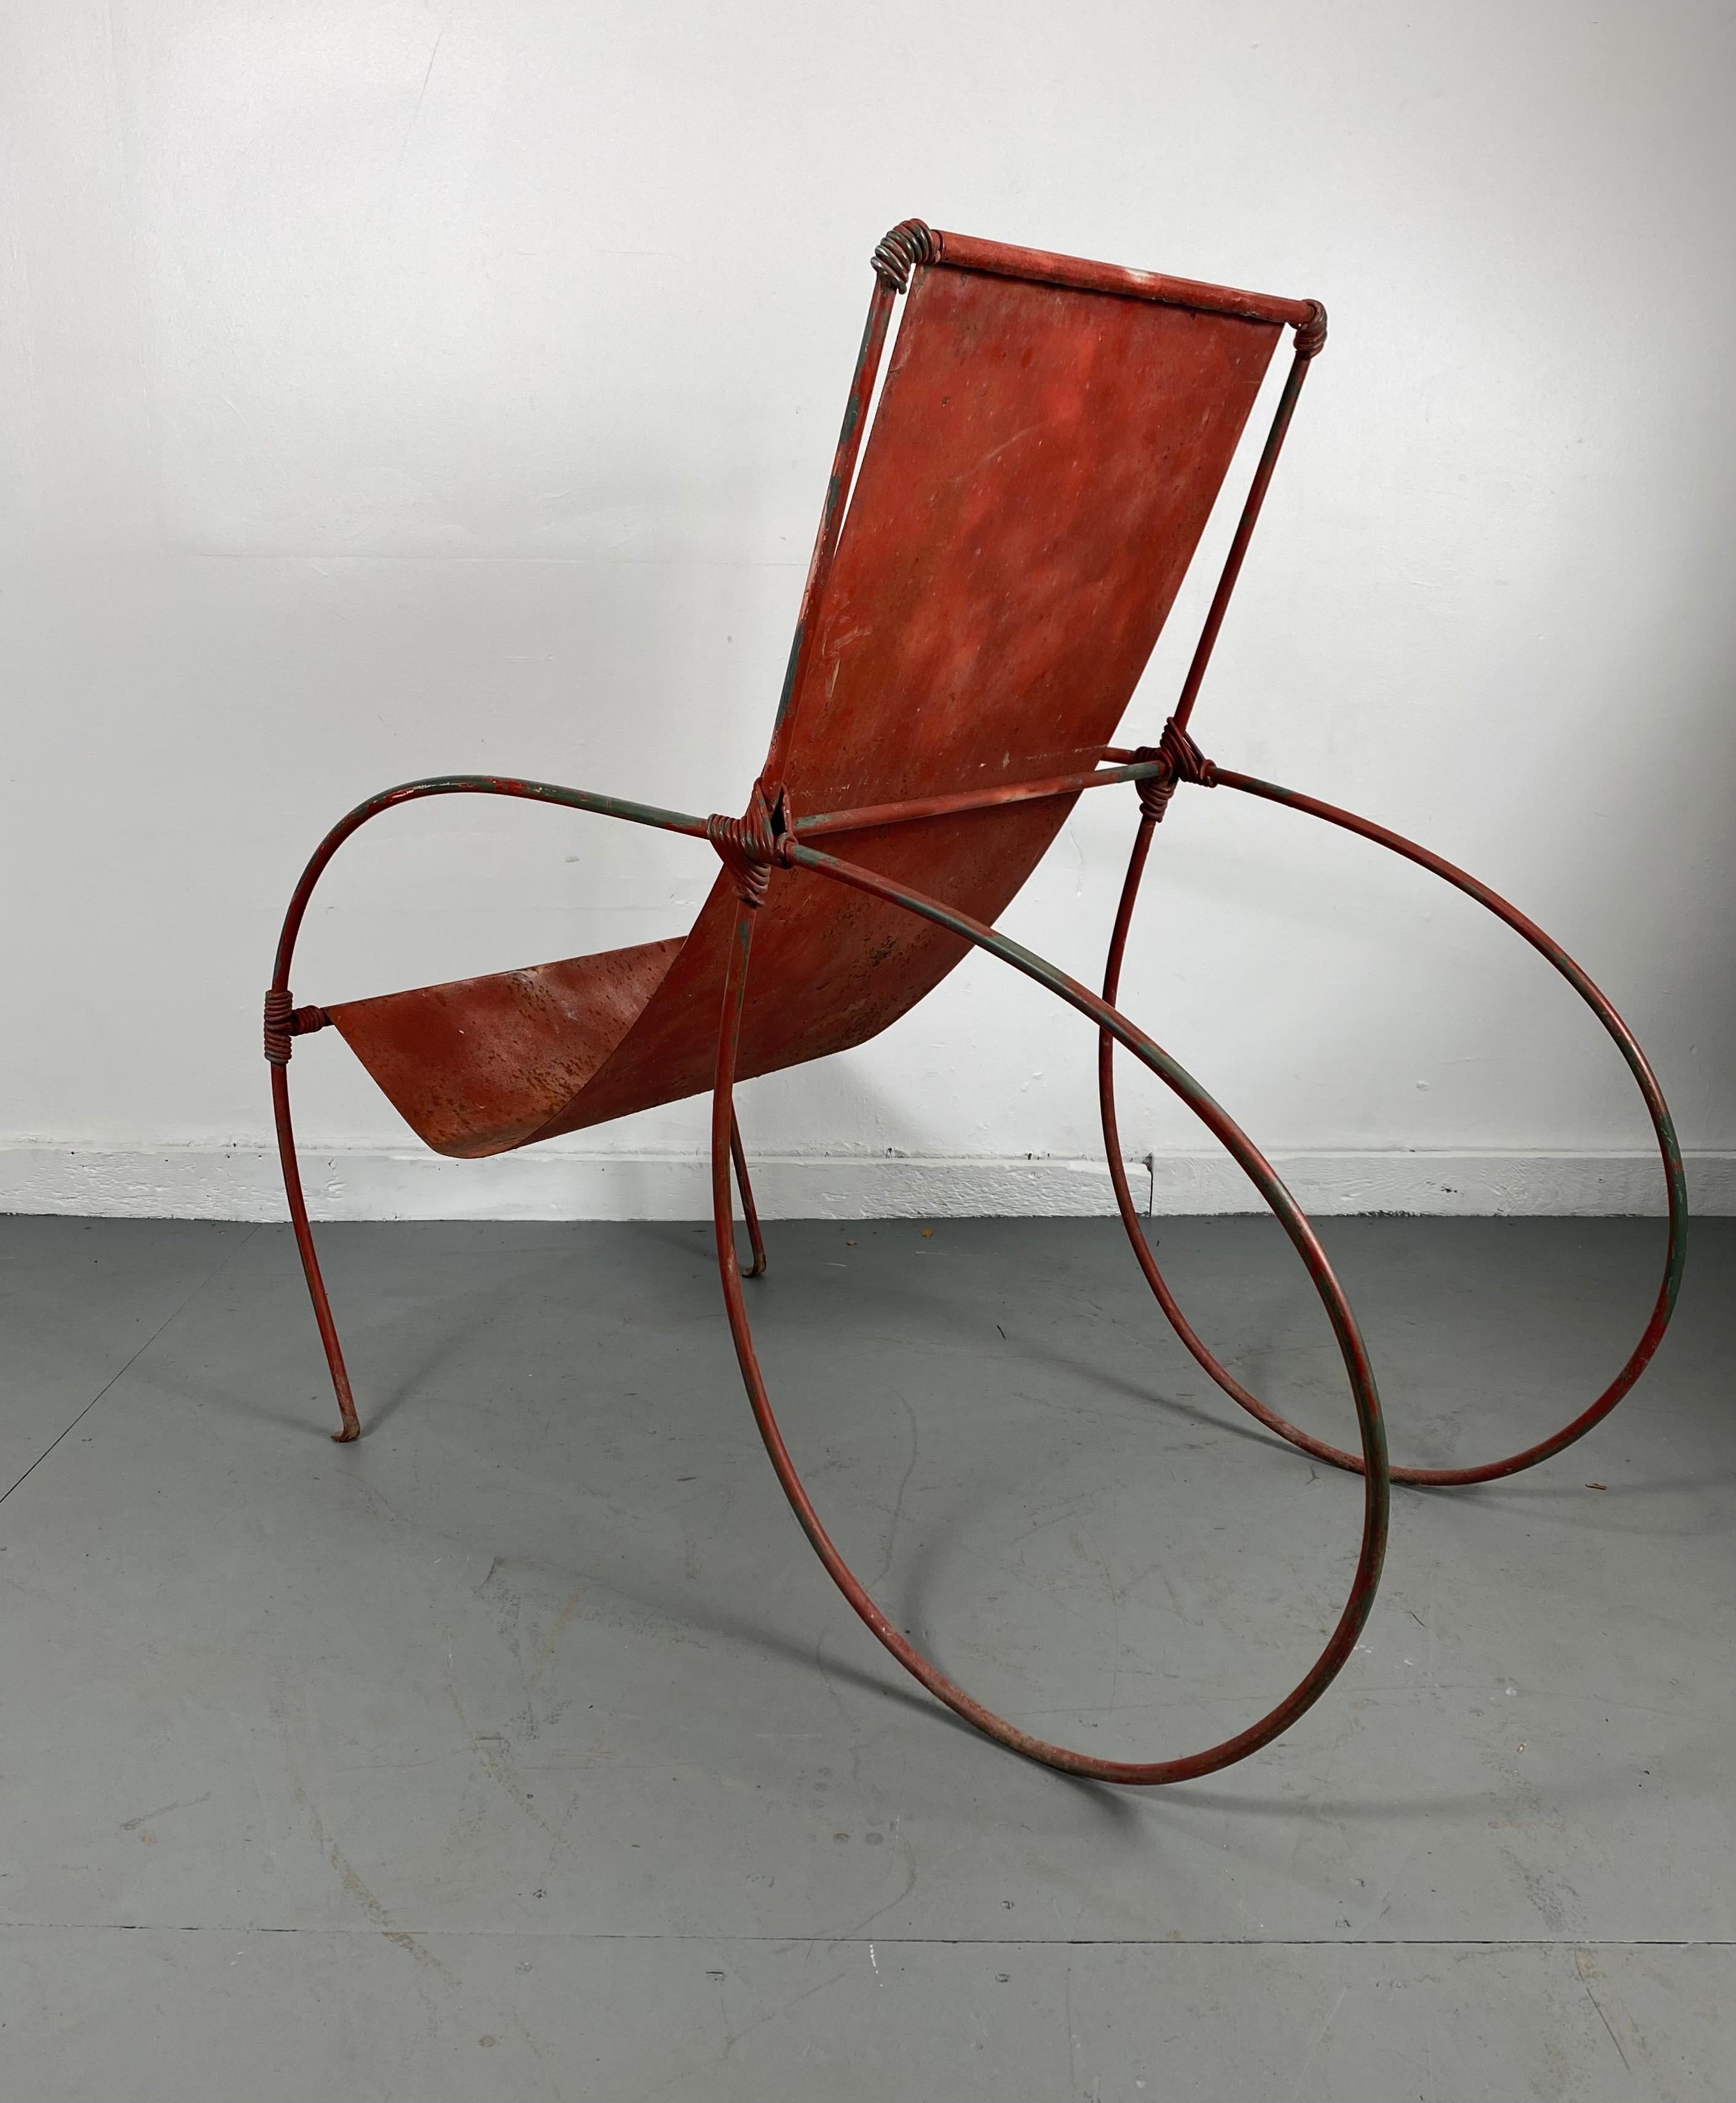 Painted Unusual Sculptural Iron Garden Lounge Chair Manner of Jean-Charles Moreux For Sale